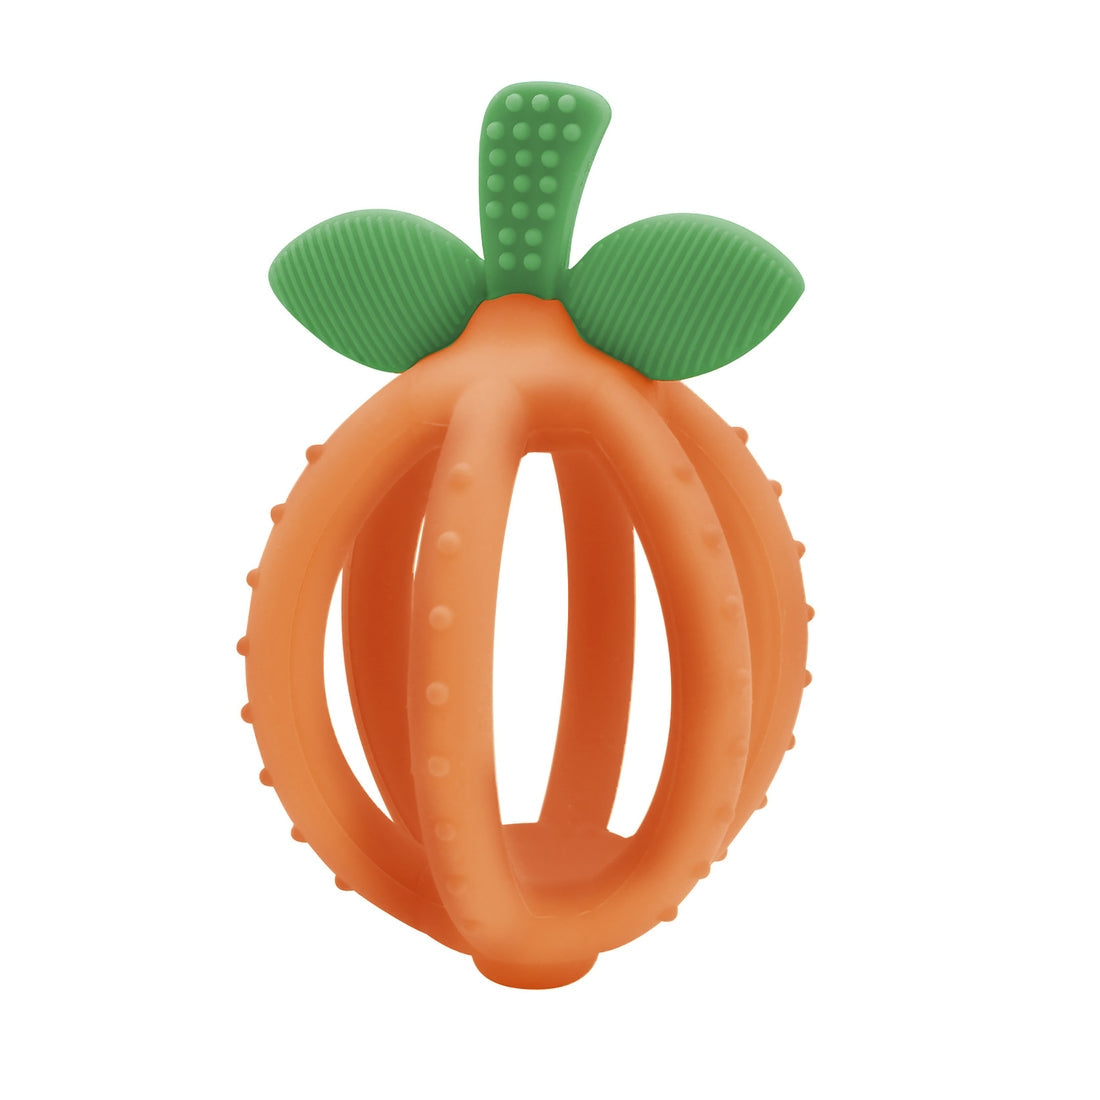 Itzy Ritzy clementine teething ball against white backdrop